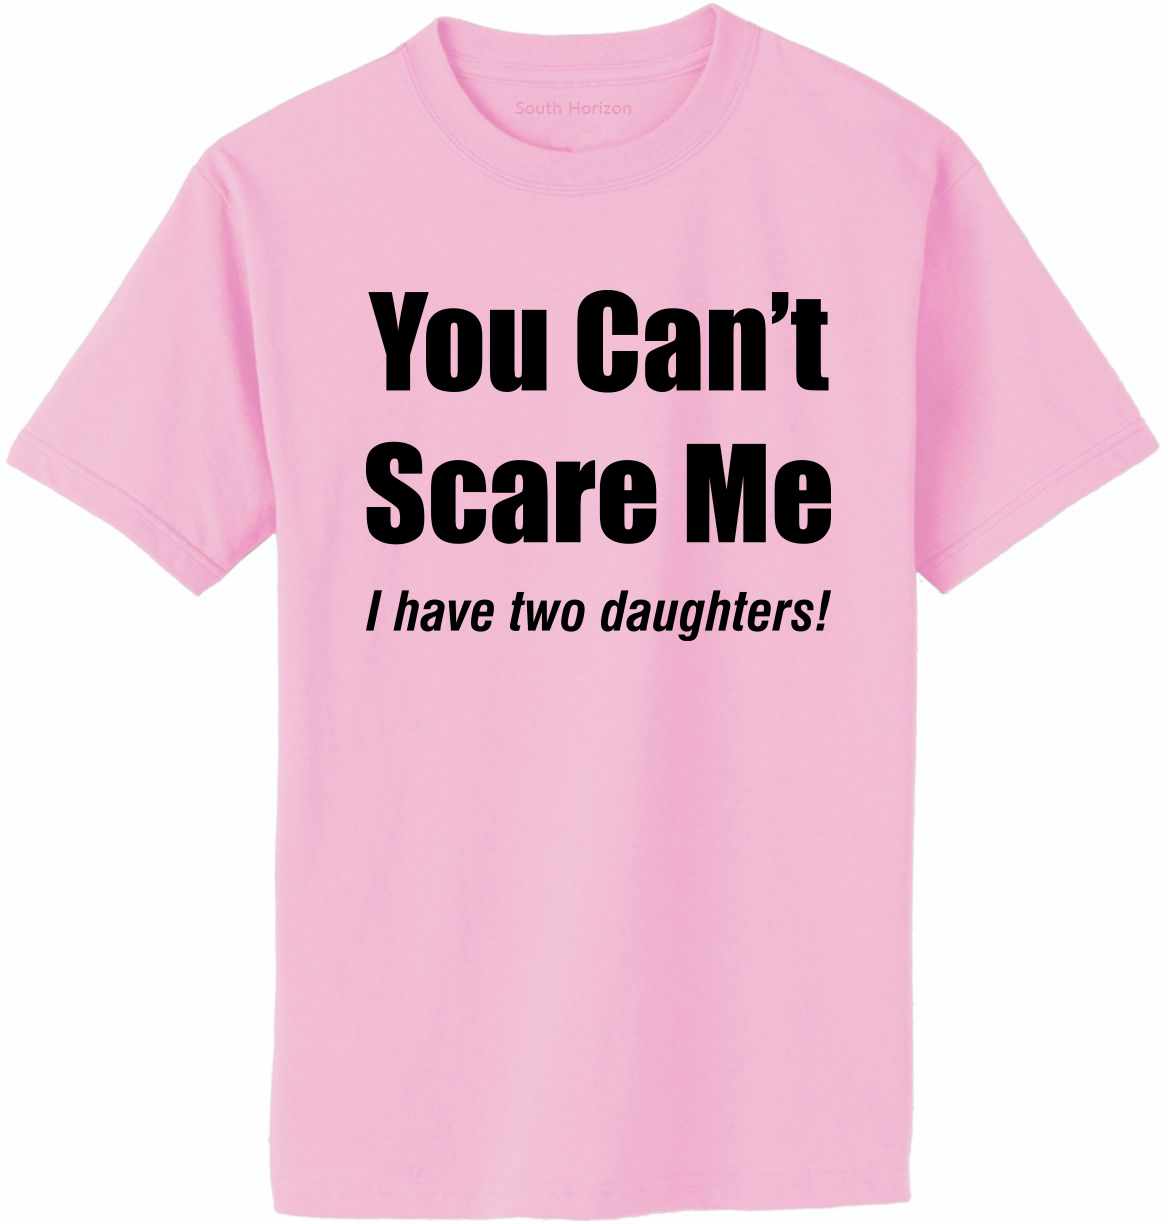 You Can't Scare Me, I have Two Daughters Adult T-Shirt (#1066-1)